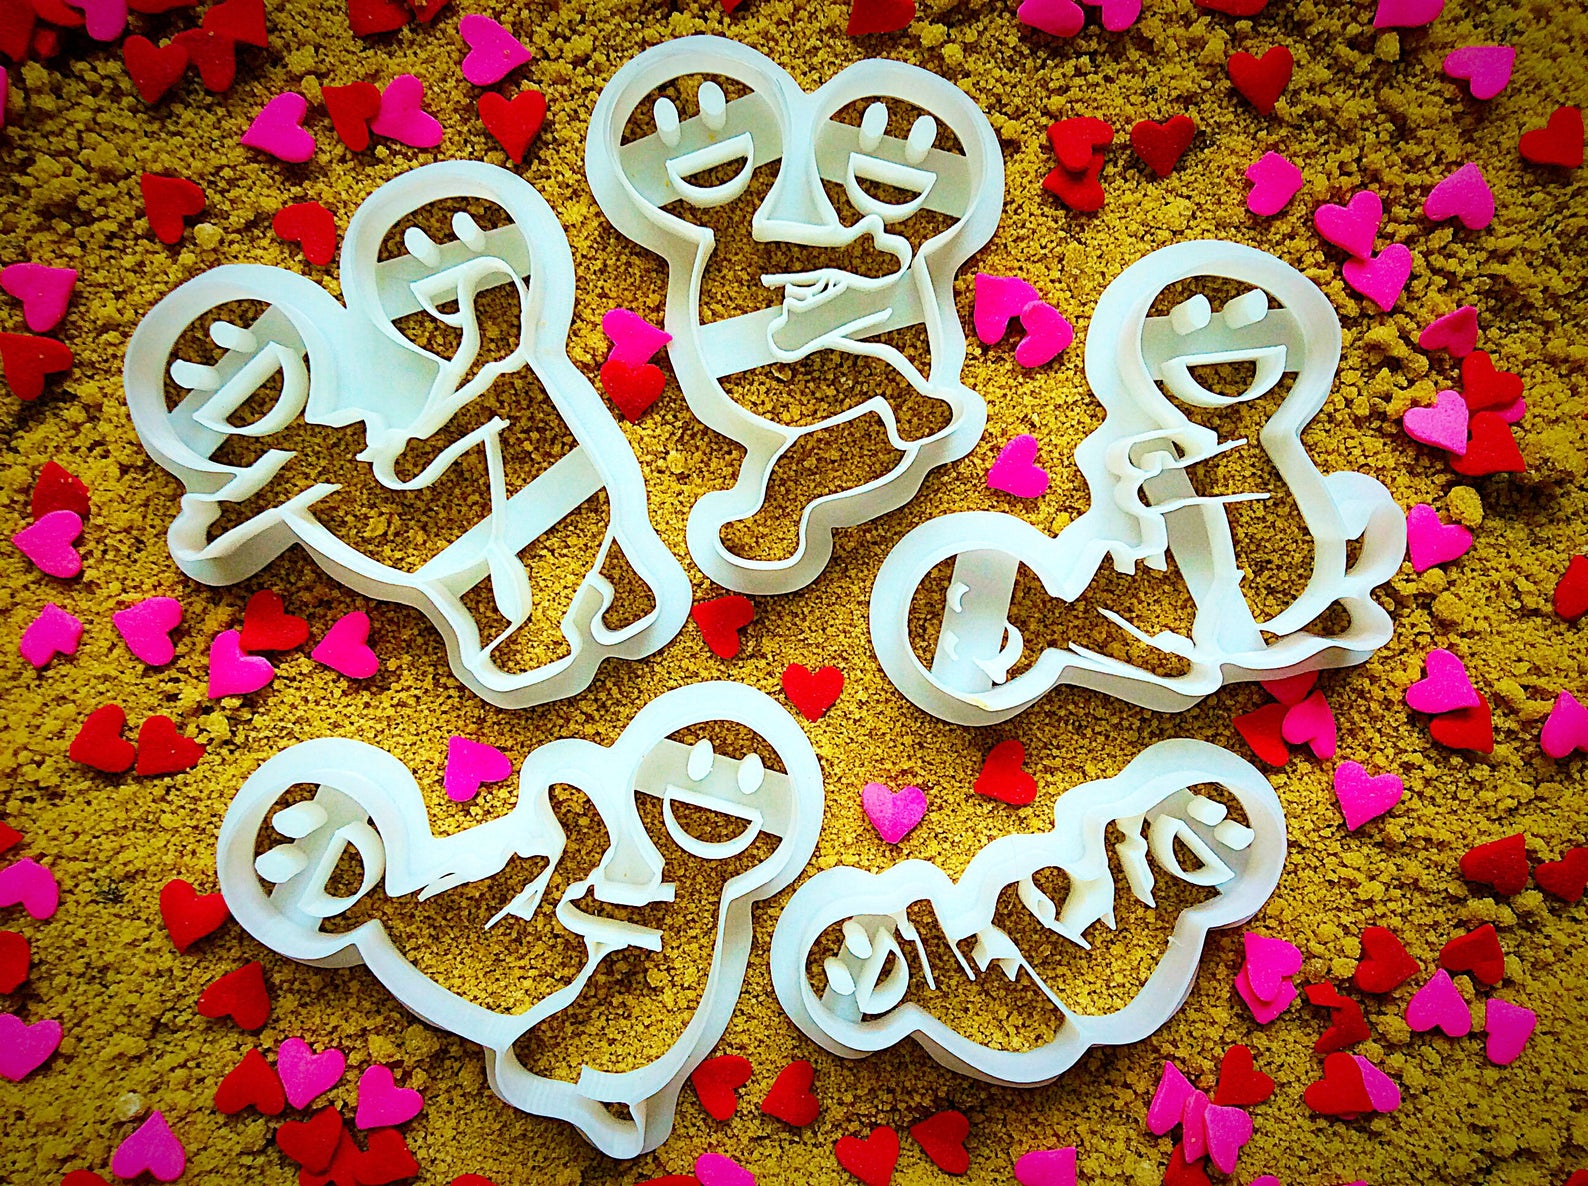 Kama Sutra Cookie Cutters